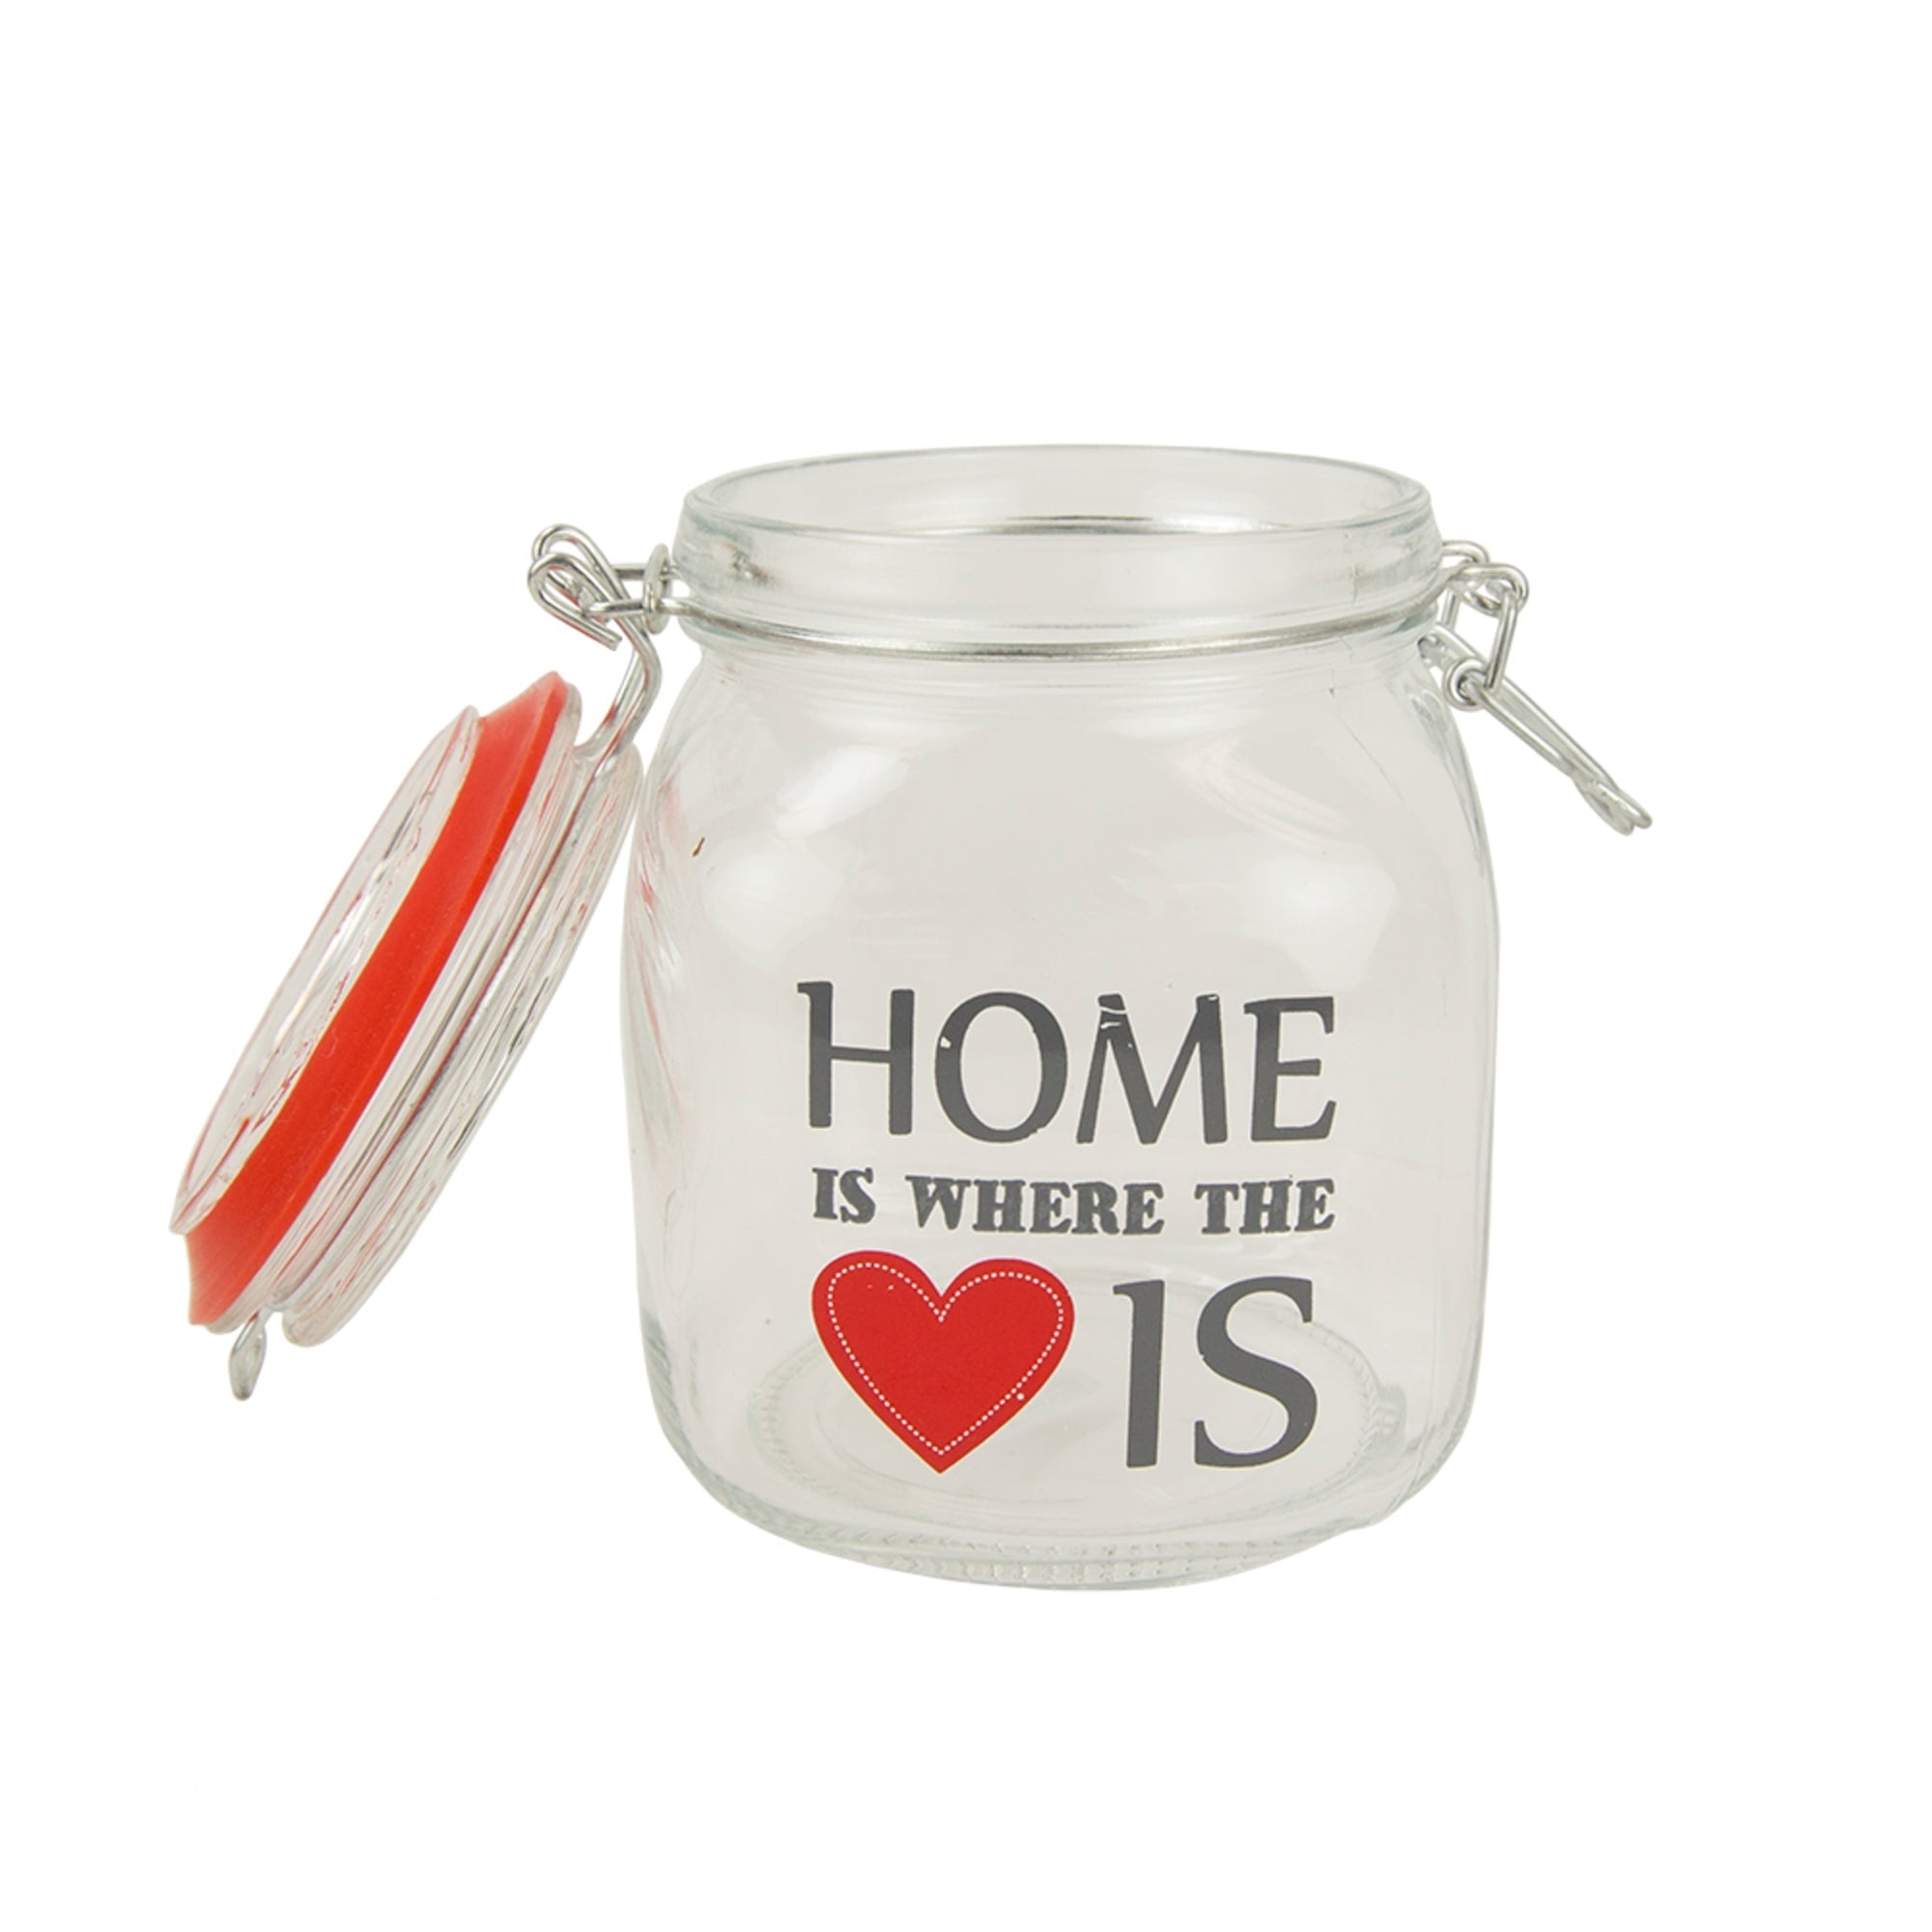 Home Basics Home is Where the Heart Is 34 oz. Glass Jar $2.50 EACH, CASE PACK OF 12